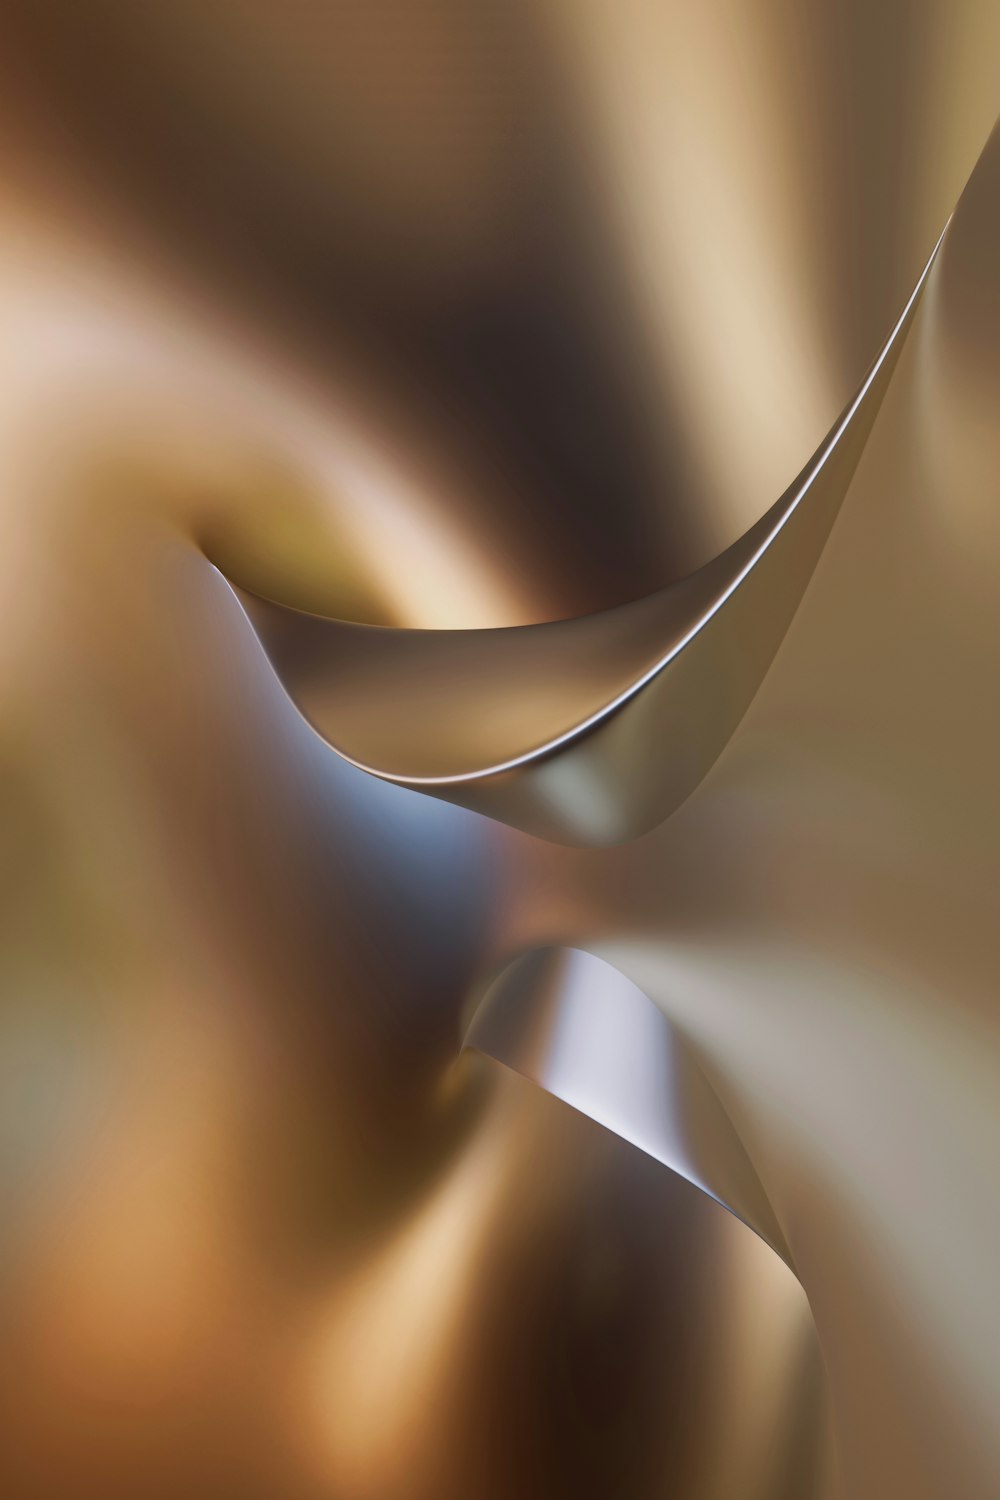 an abstract image of a curved metal object